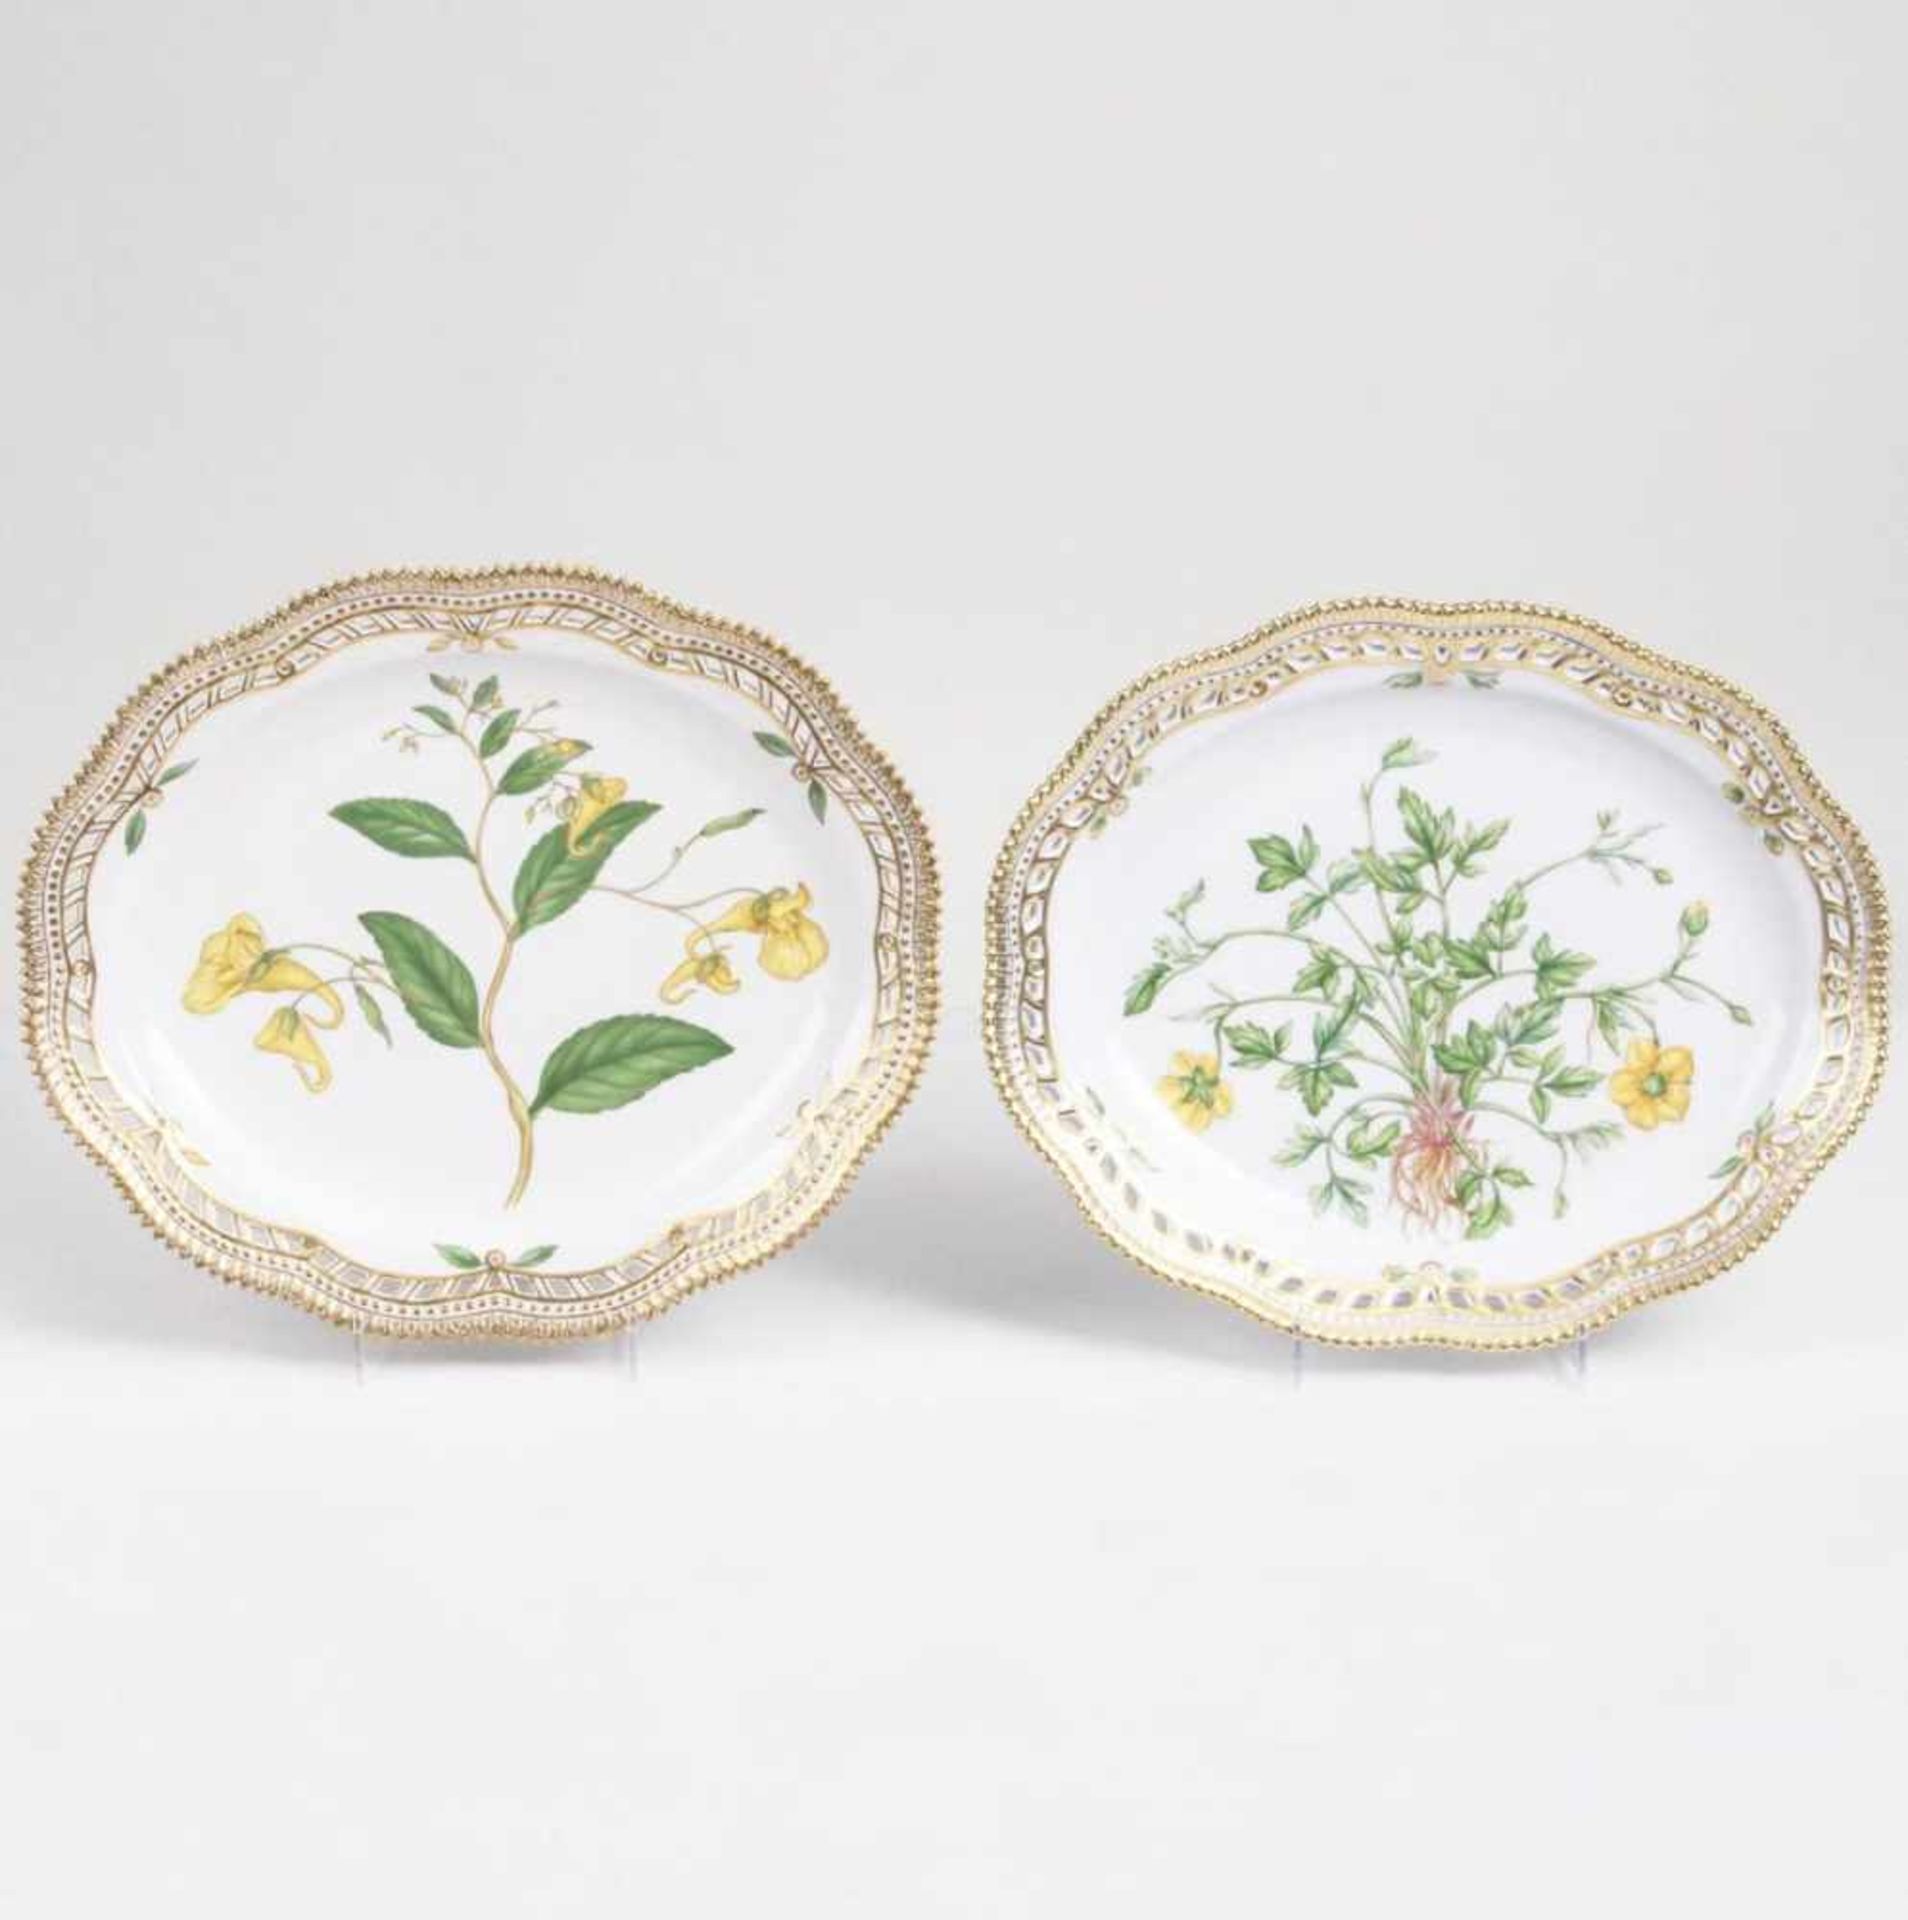 A Pair of small Oval Flora Danica Dishes with Botanical SpecimensRoyal Copenhagen, 1990s. Polychrome